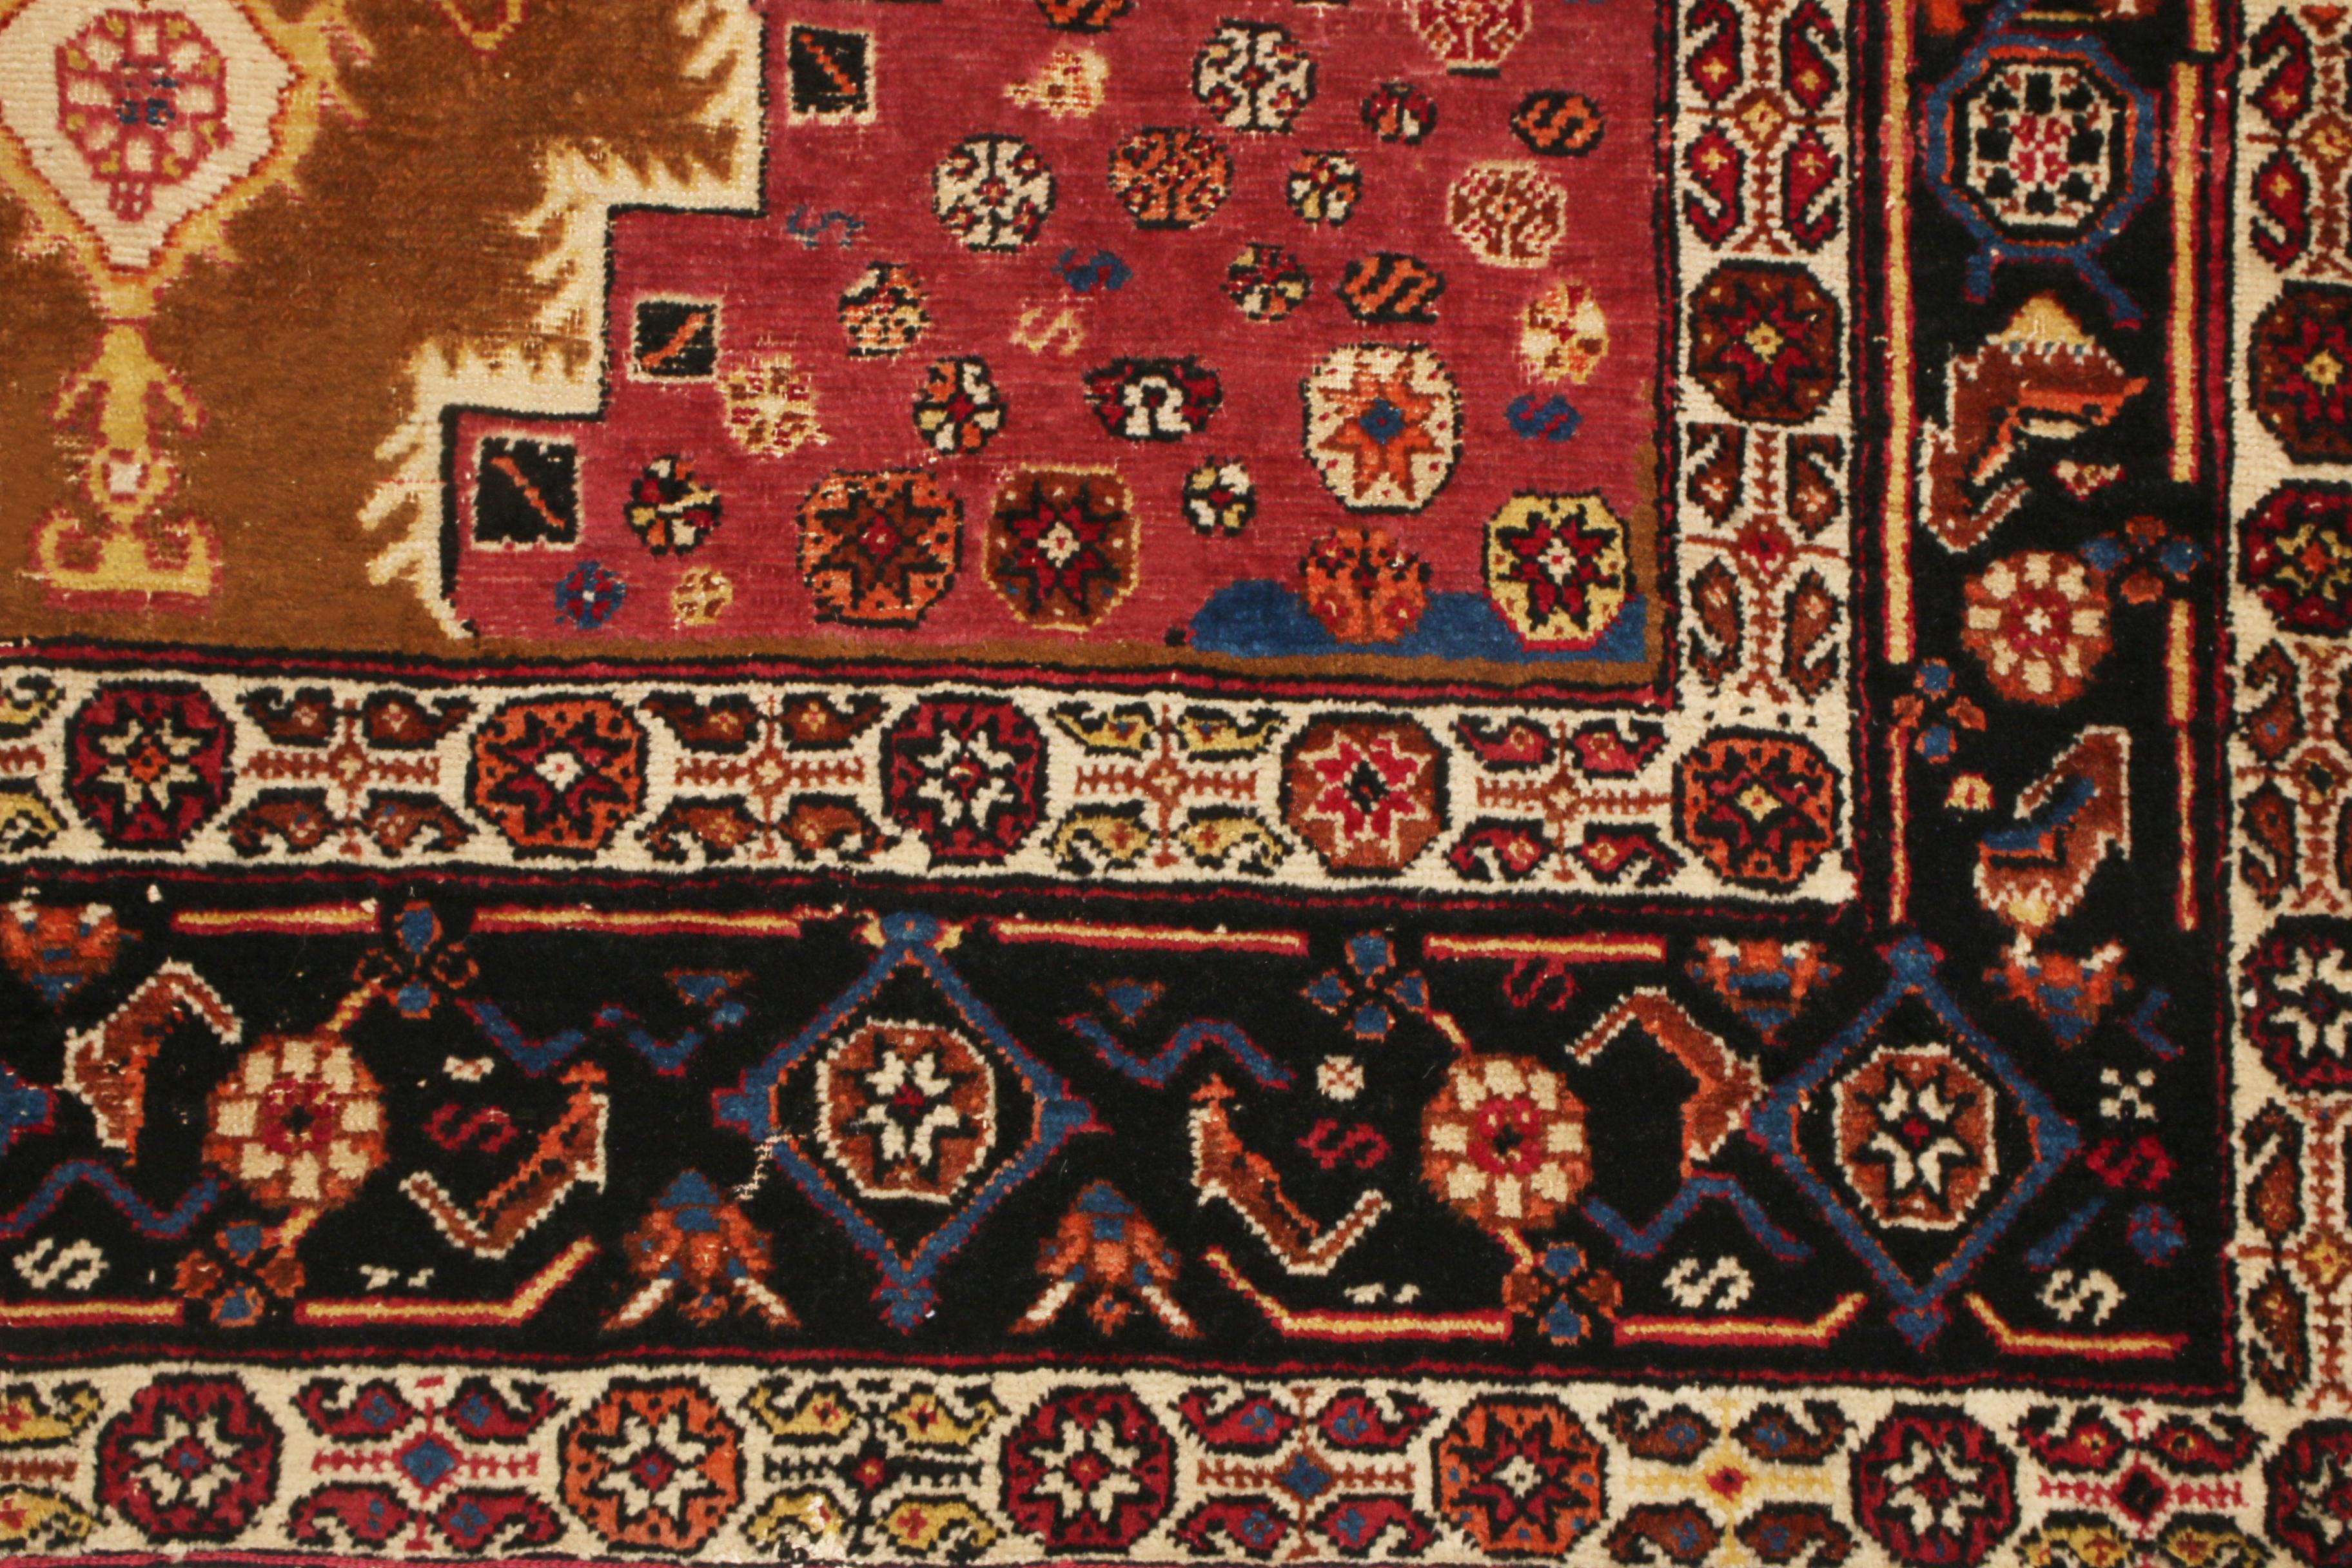 Hand-Knotted Antique Bakhtiari Transitional Red and Copper Brown Wool Rug